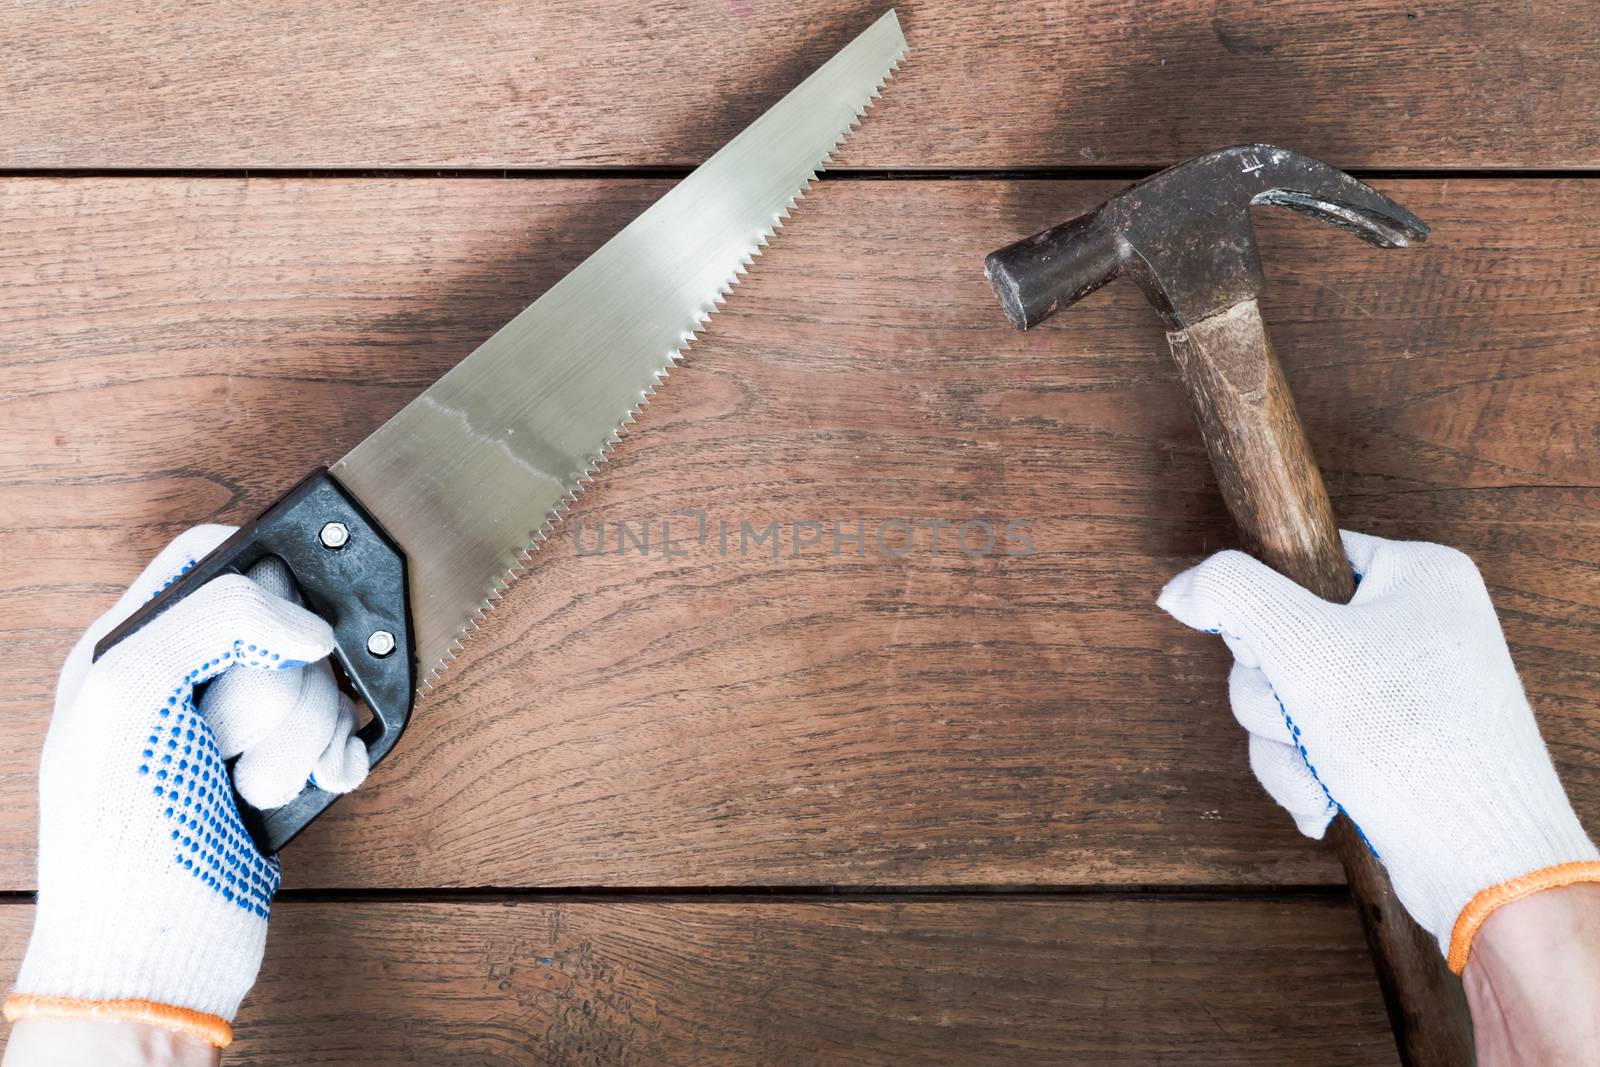 Hands holding hammer  and saw on wooden table background.